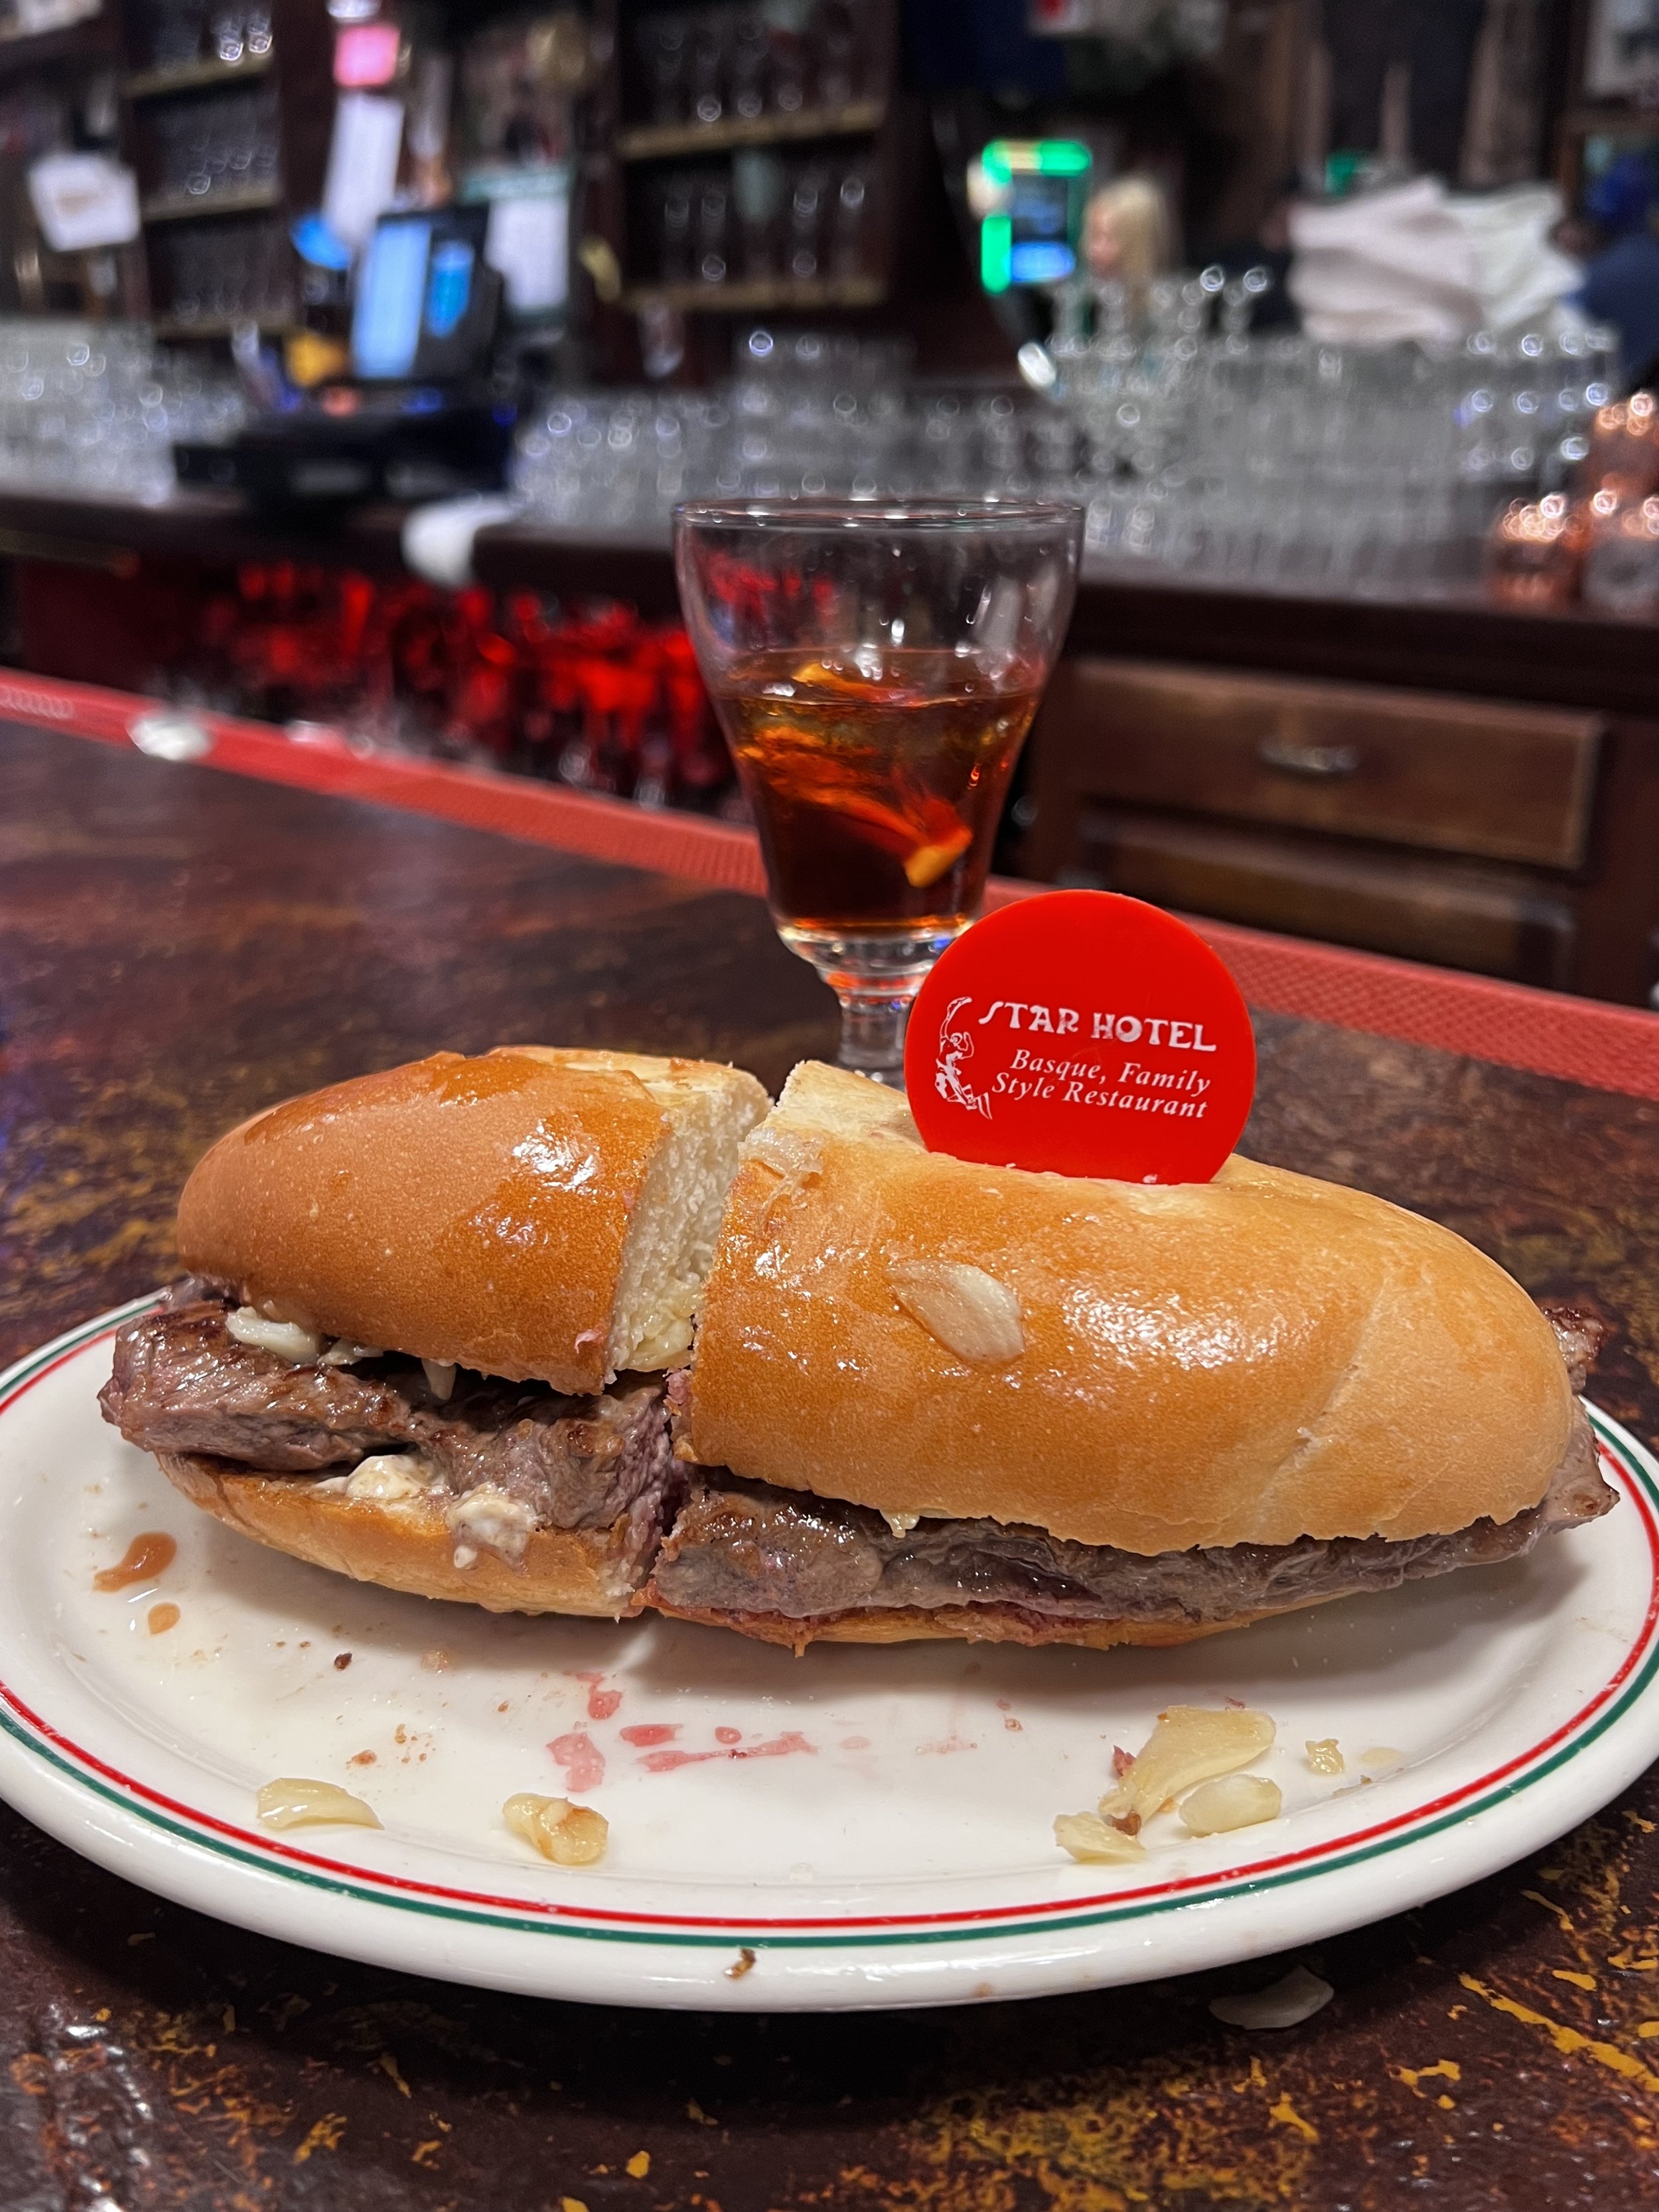 Famous Steak Sandwich at The Star Hotel